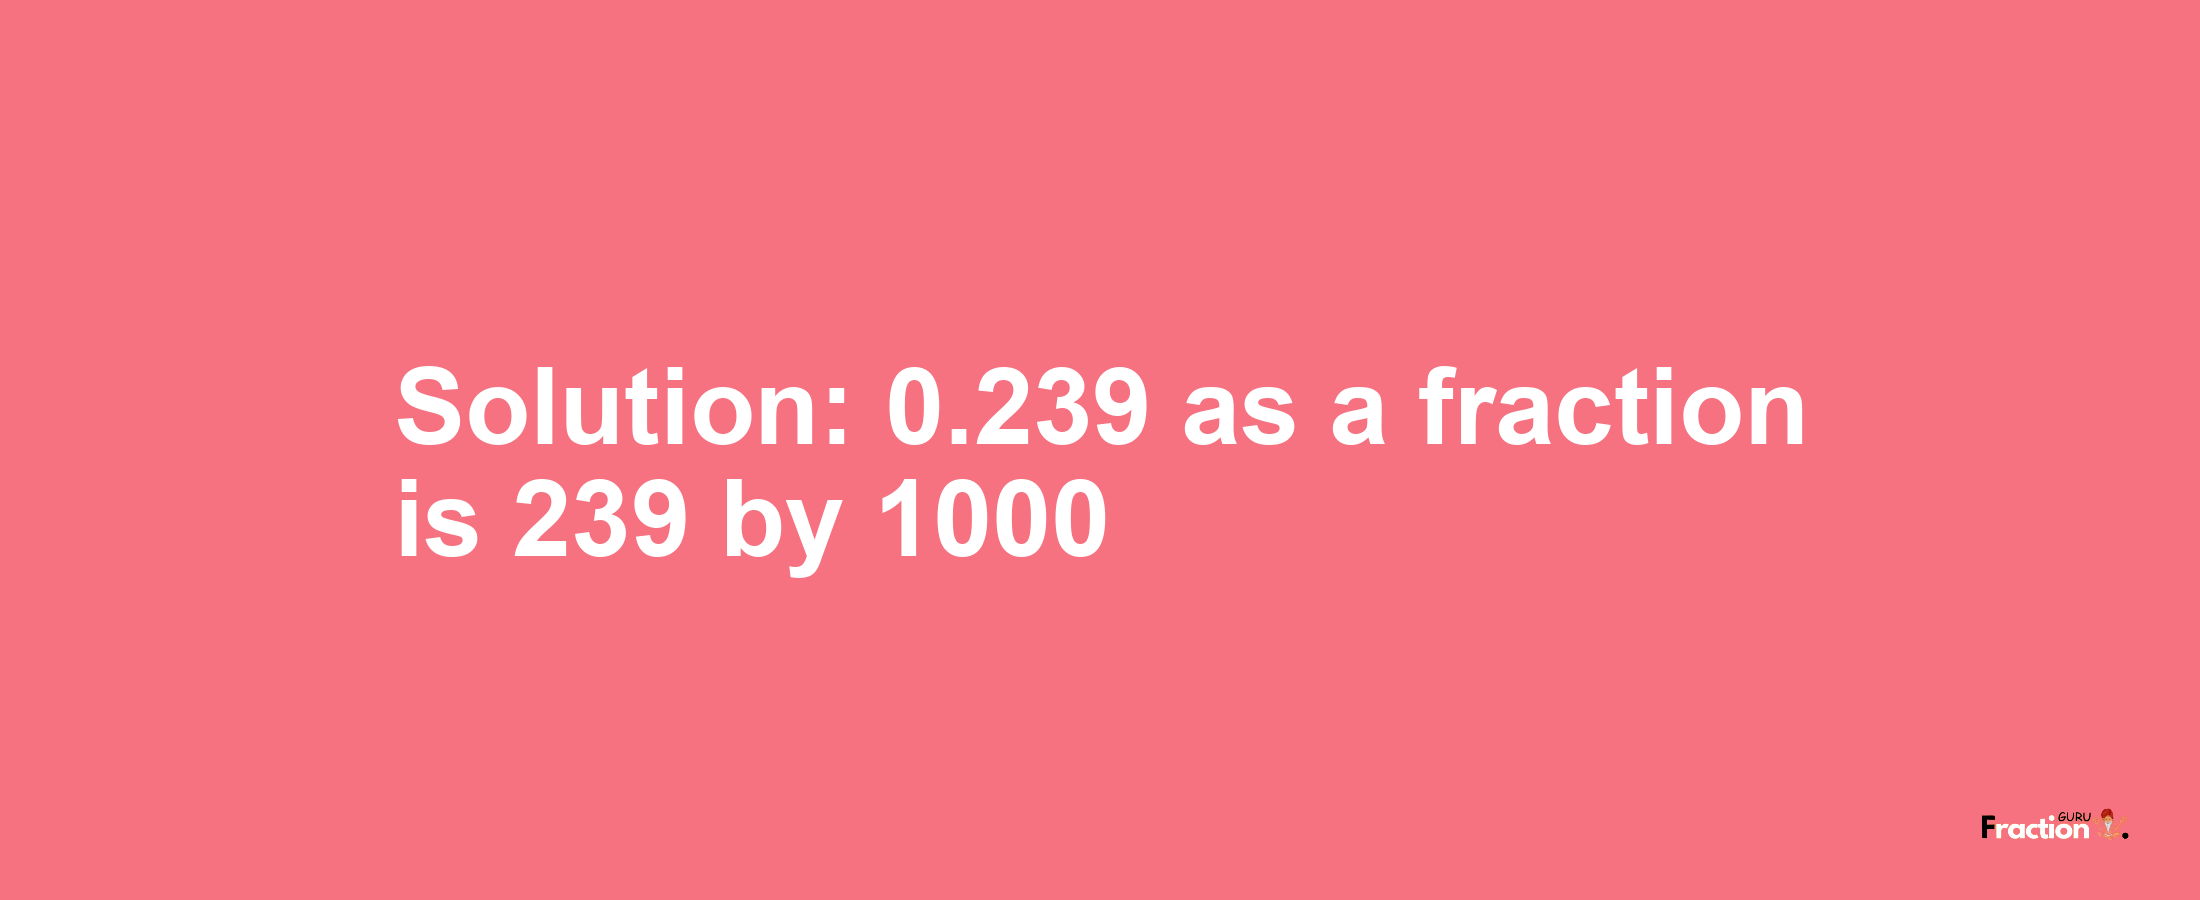 Solution:0.239 as a fraction is 239/1000